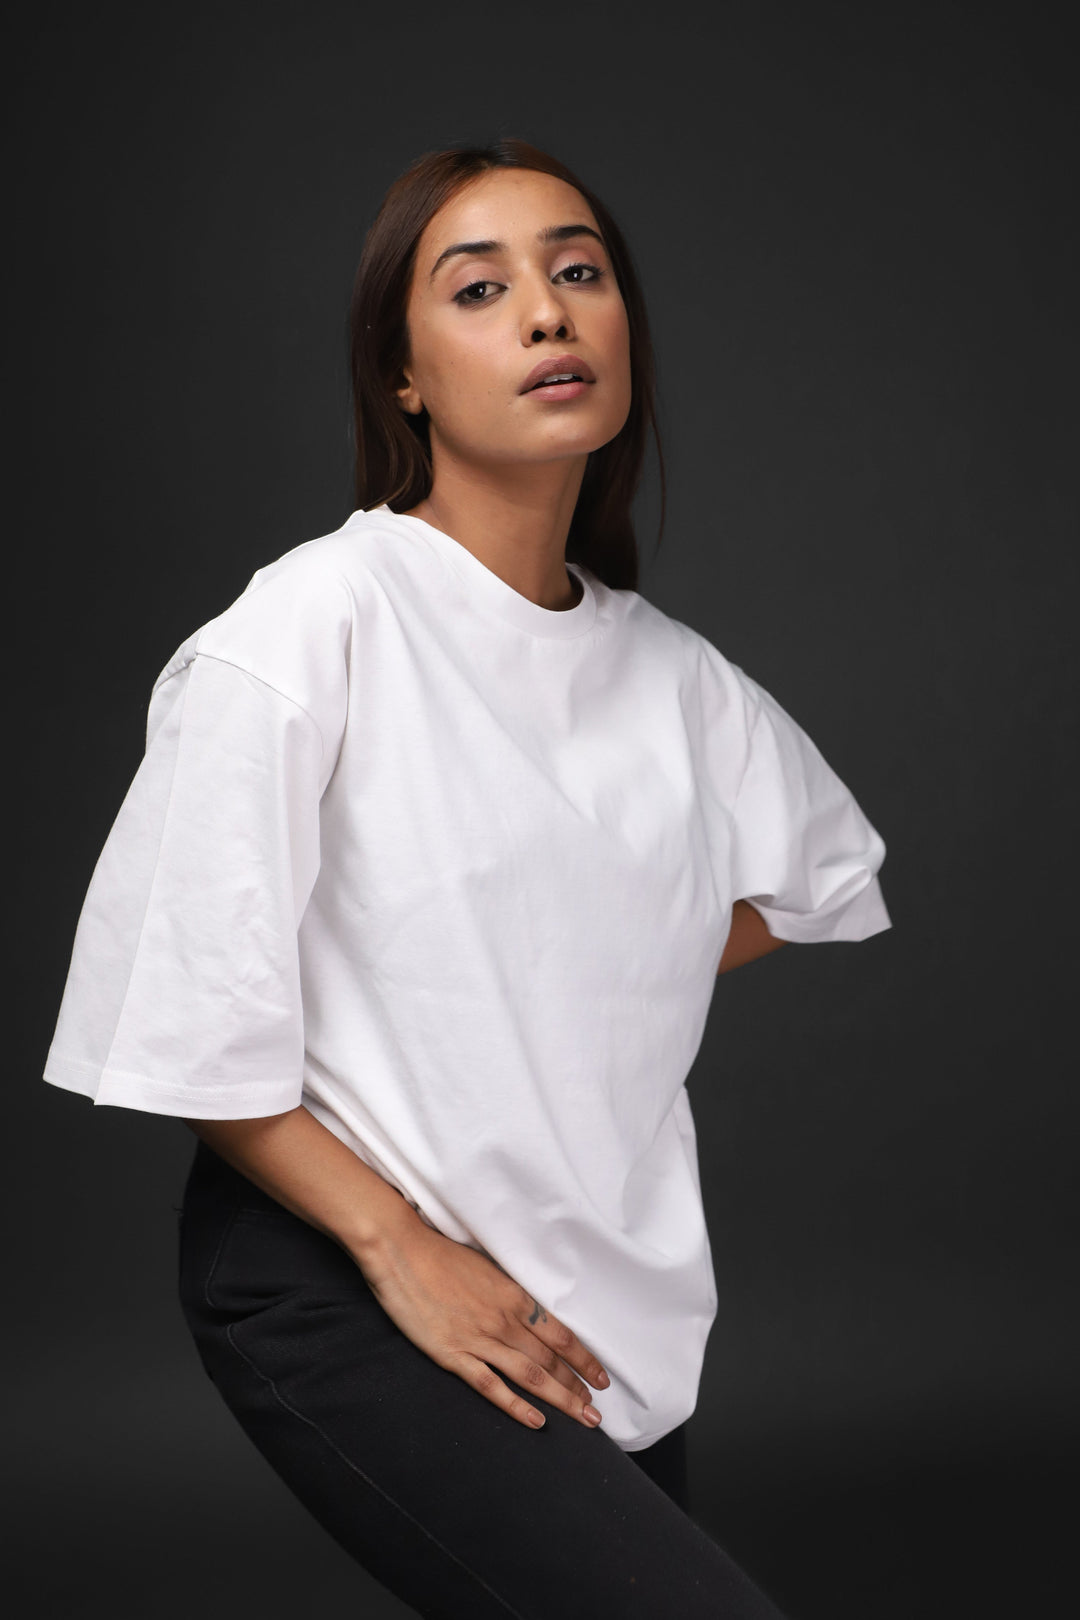 Over Size Tee - Women's White Over Size Tee#48